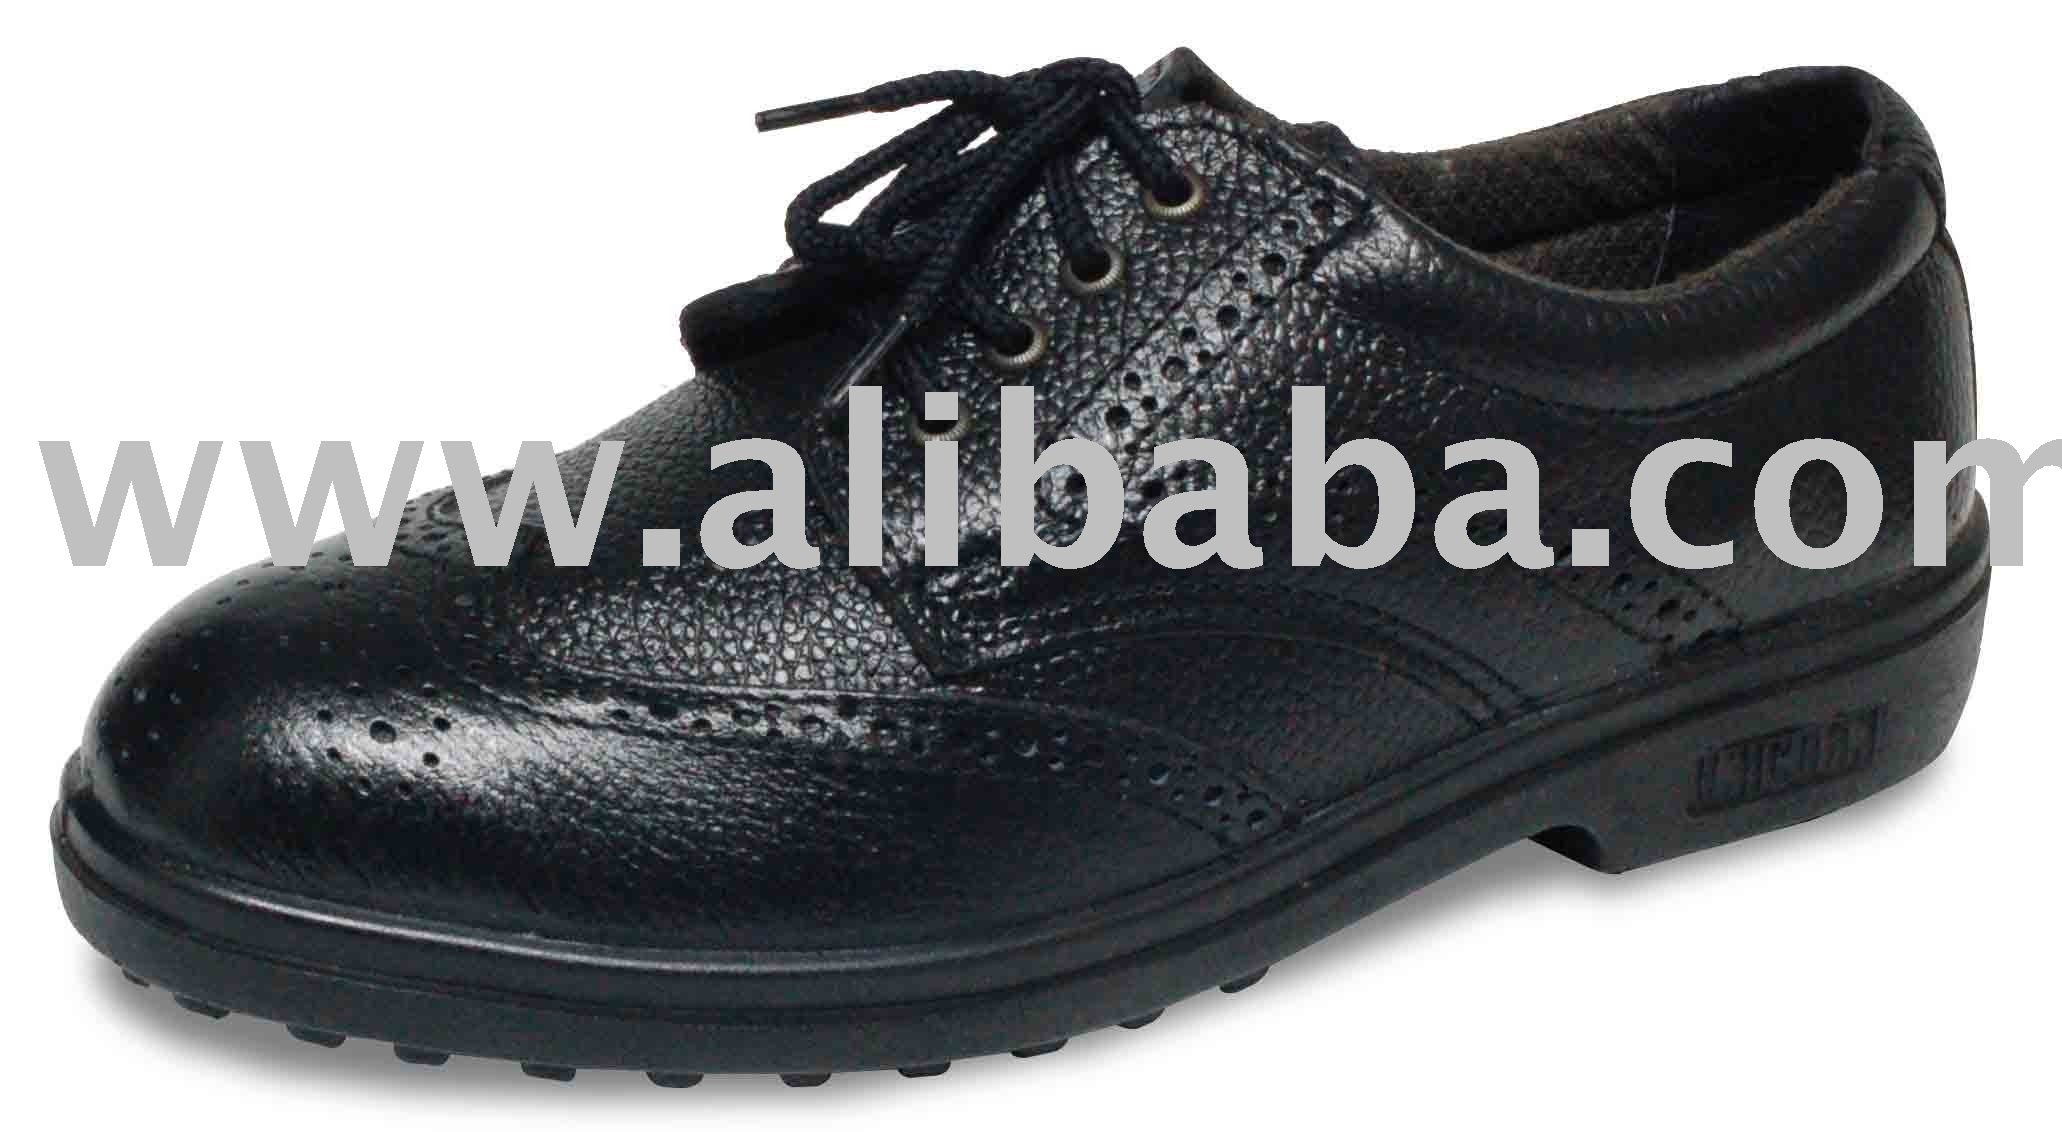 NEW 612 SAFETY SHOES IMAGES | safety shoes